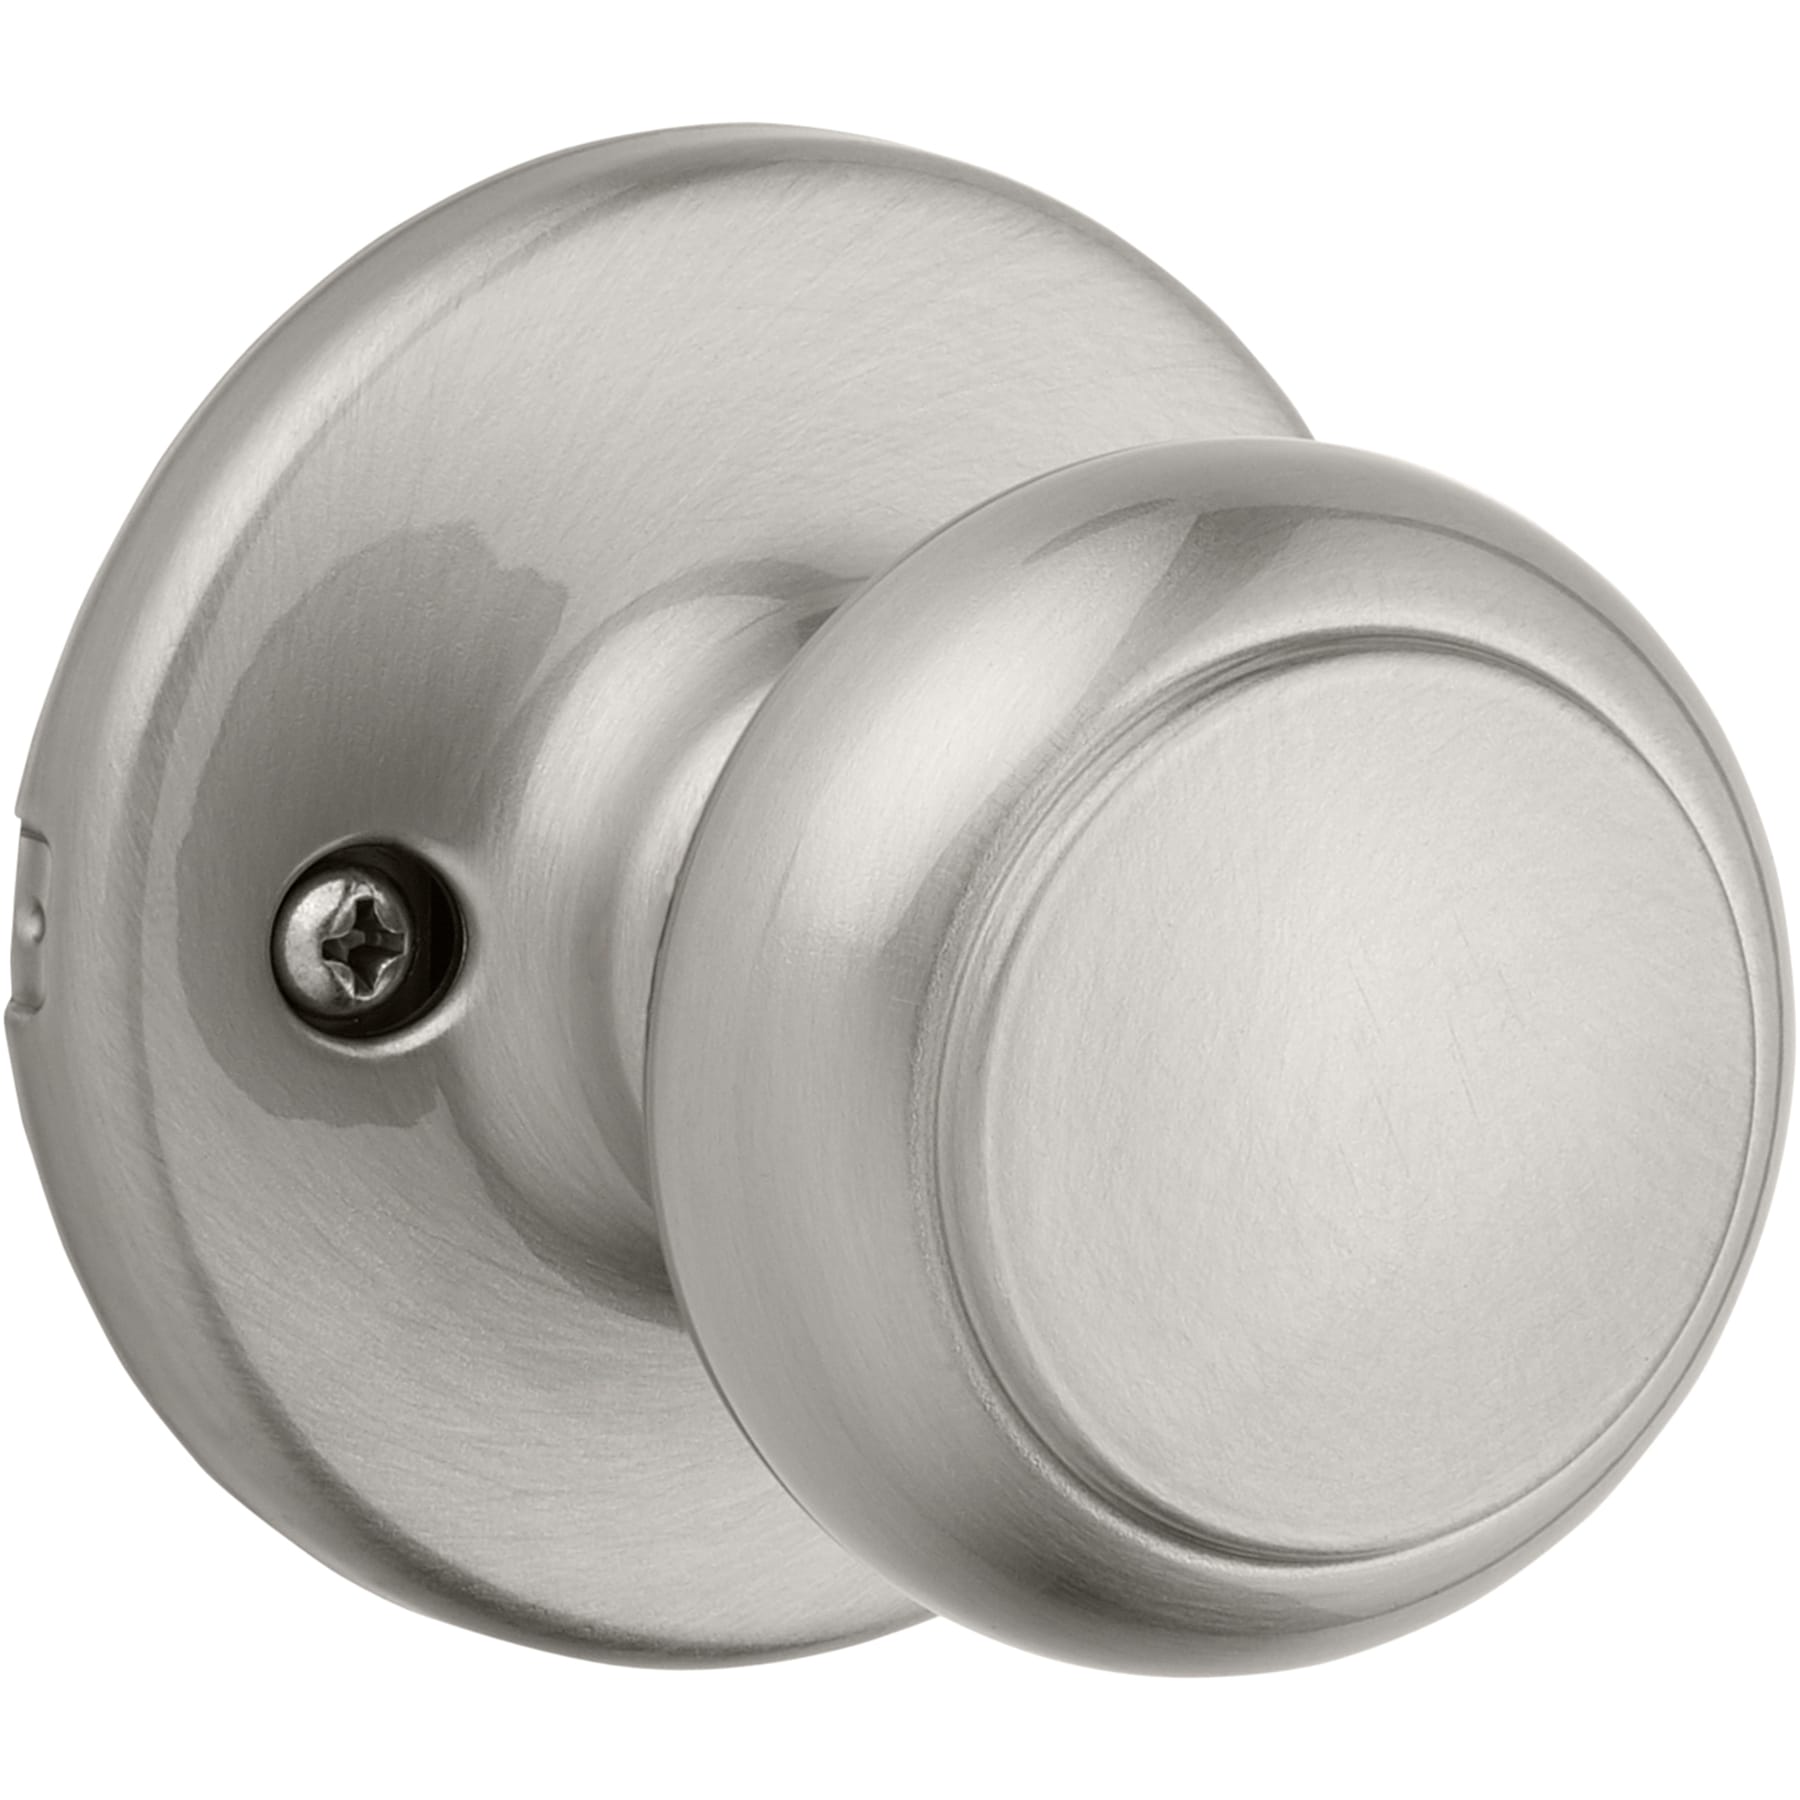 Kwikset Security Cove Satin Nickel Interior/Exterior Hall/Closet Passage  Door Knob with Antimicrobial Technology in the Door Knobs department at 